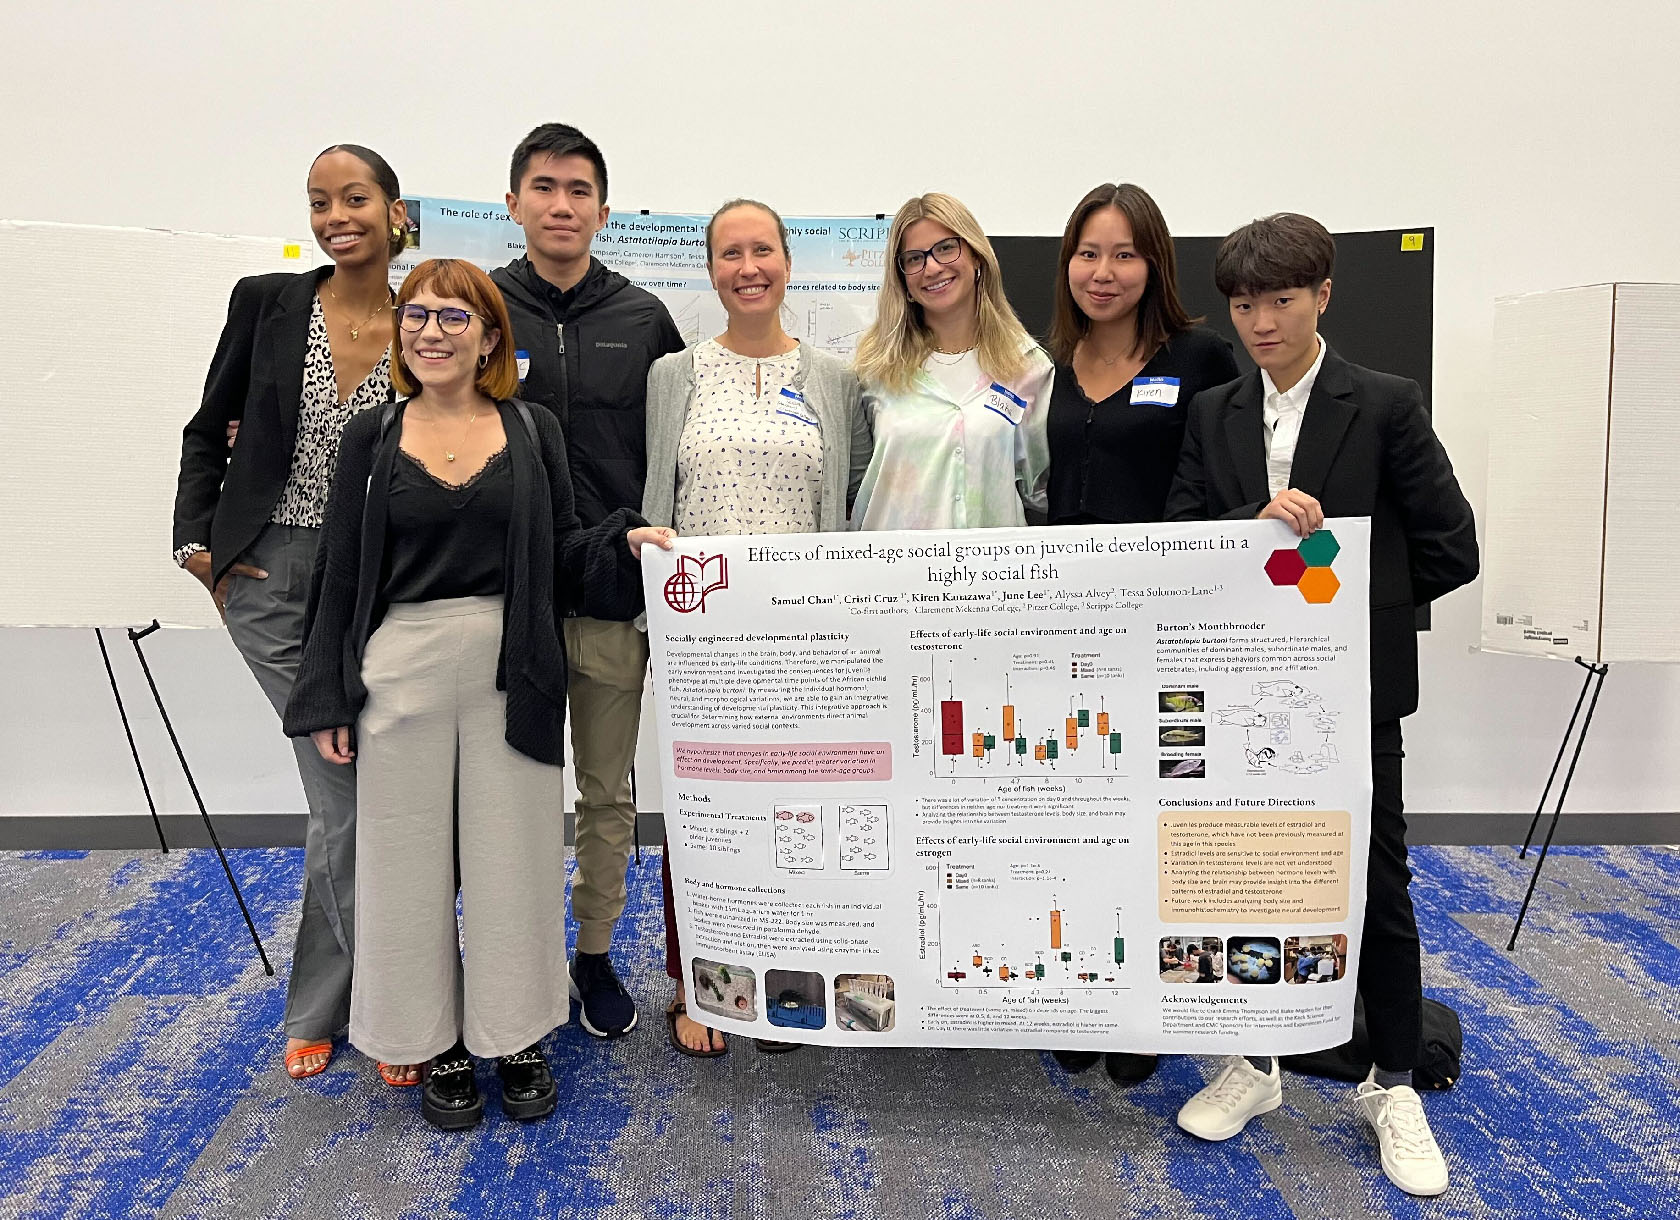 Tessa Solomon-Lane and 6 other contributors to the CAREER grant standing with a poster detailing the research project.